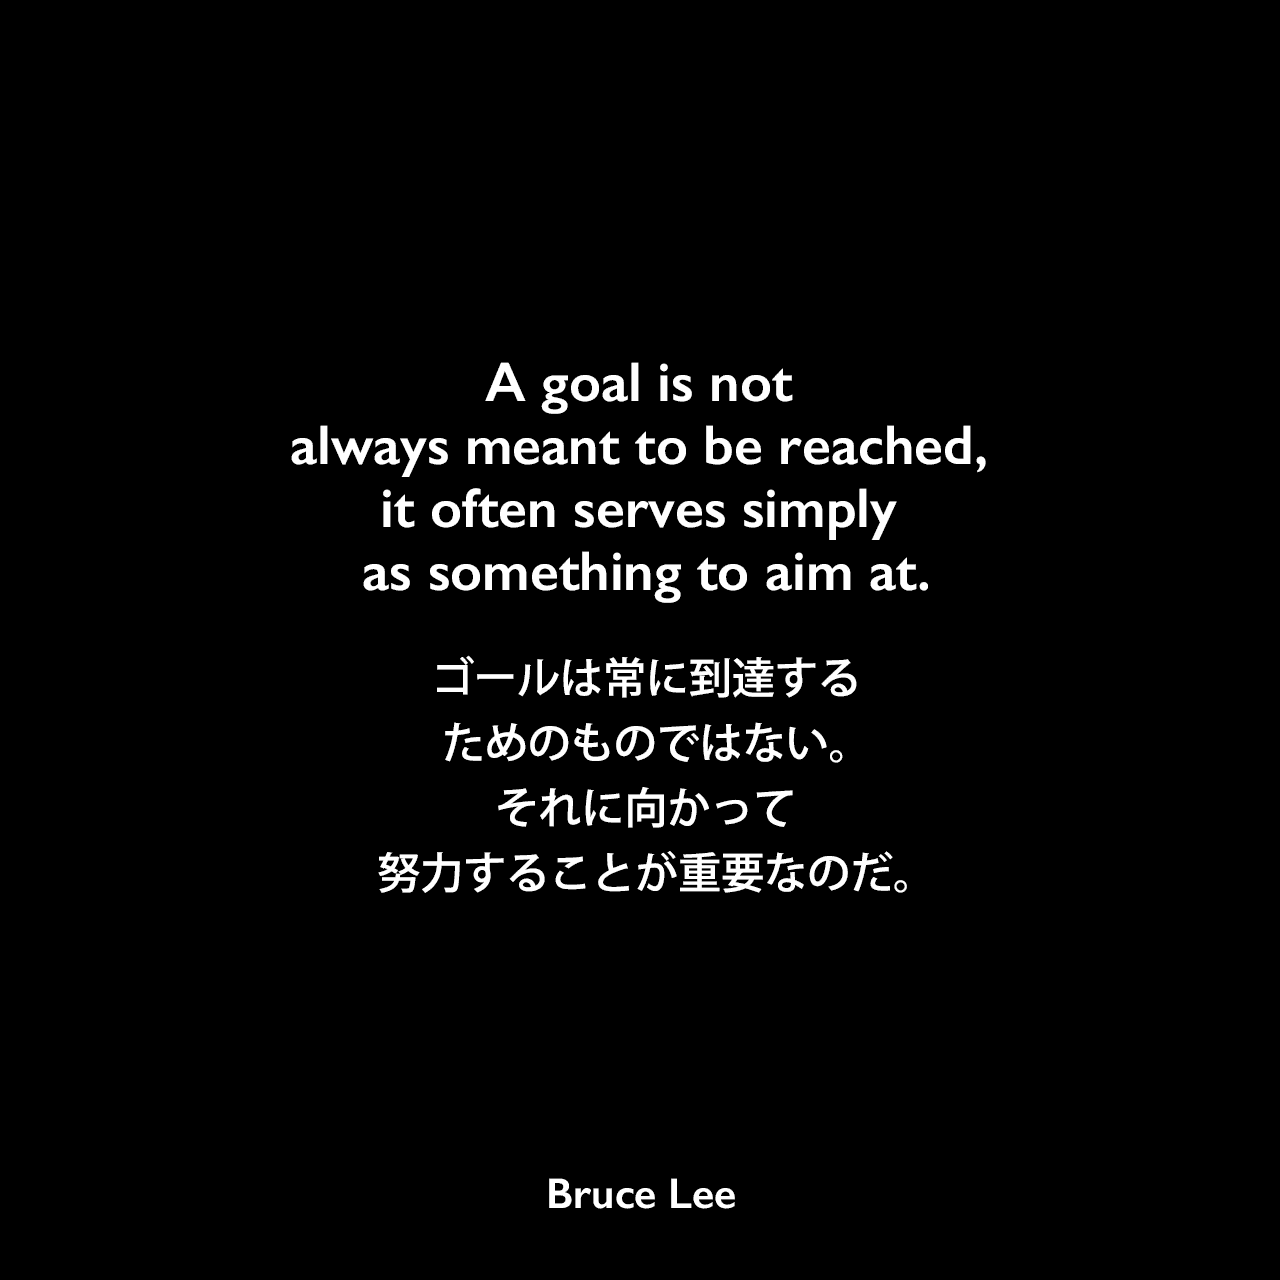 A goal is not always meant to be reached, it often serves simply as something to aim at.ゴールは常に到達するためのものではない。それに向かって努力することが重要なのだ。- ブルース・リーの本「ブルース・リーが語るストライキング・ソーツ」よりBruce Lee